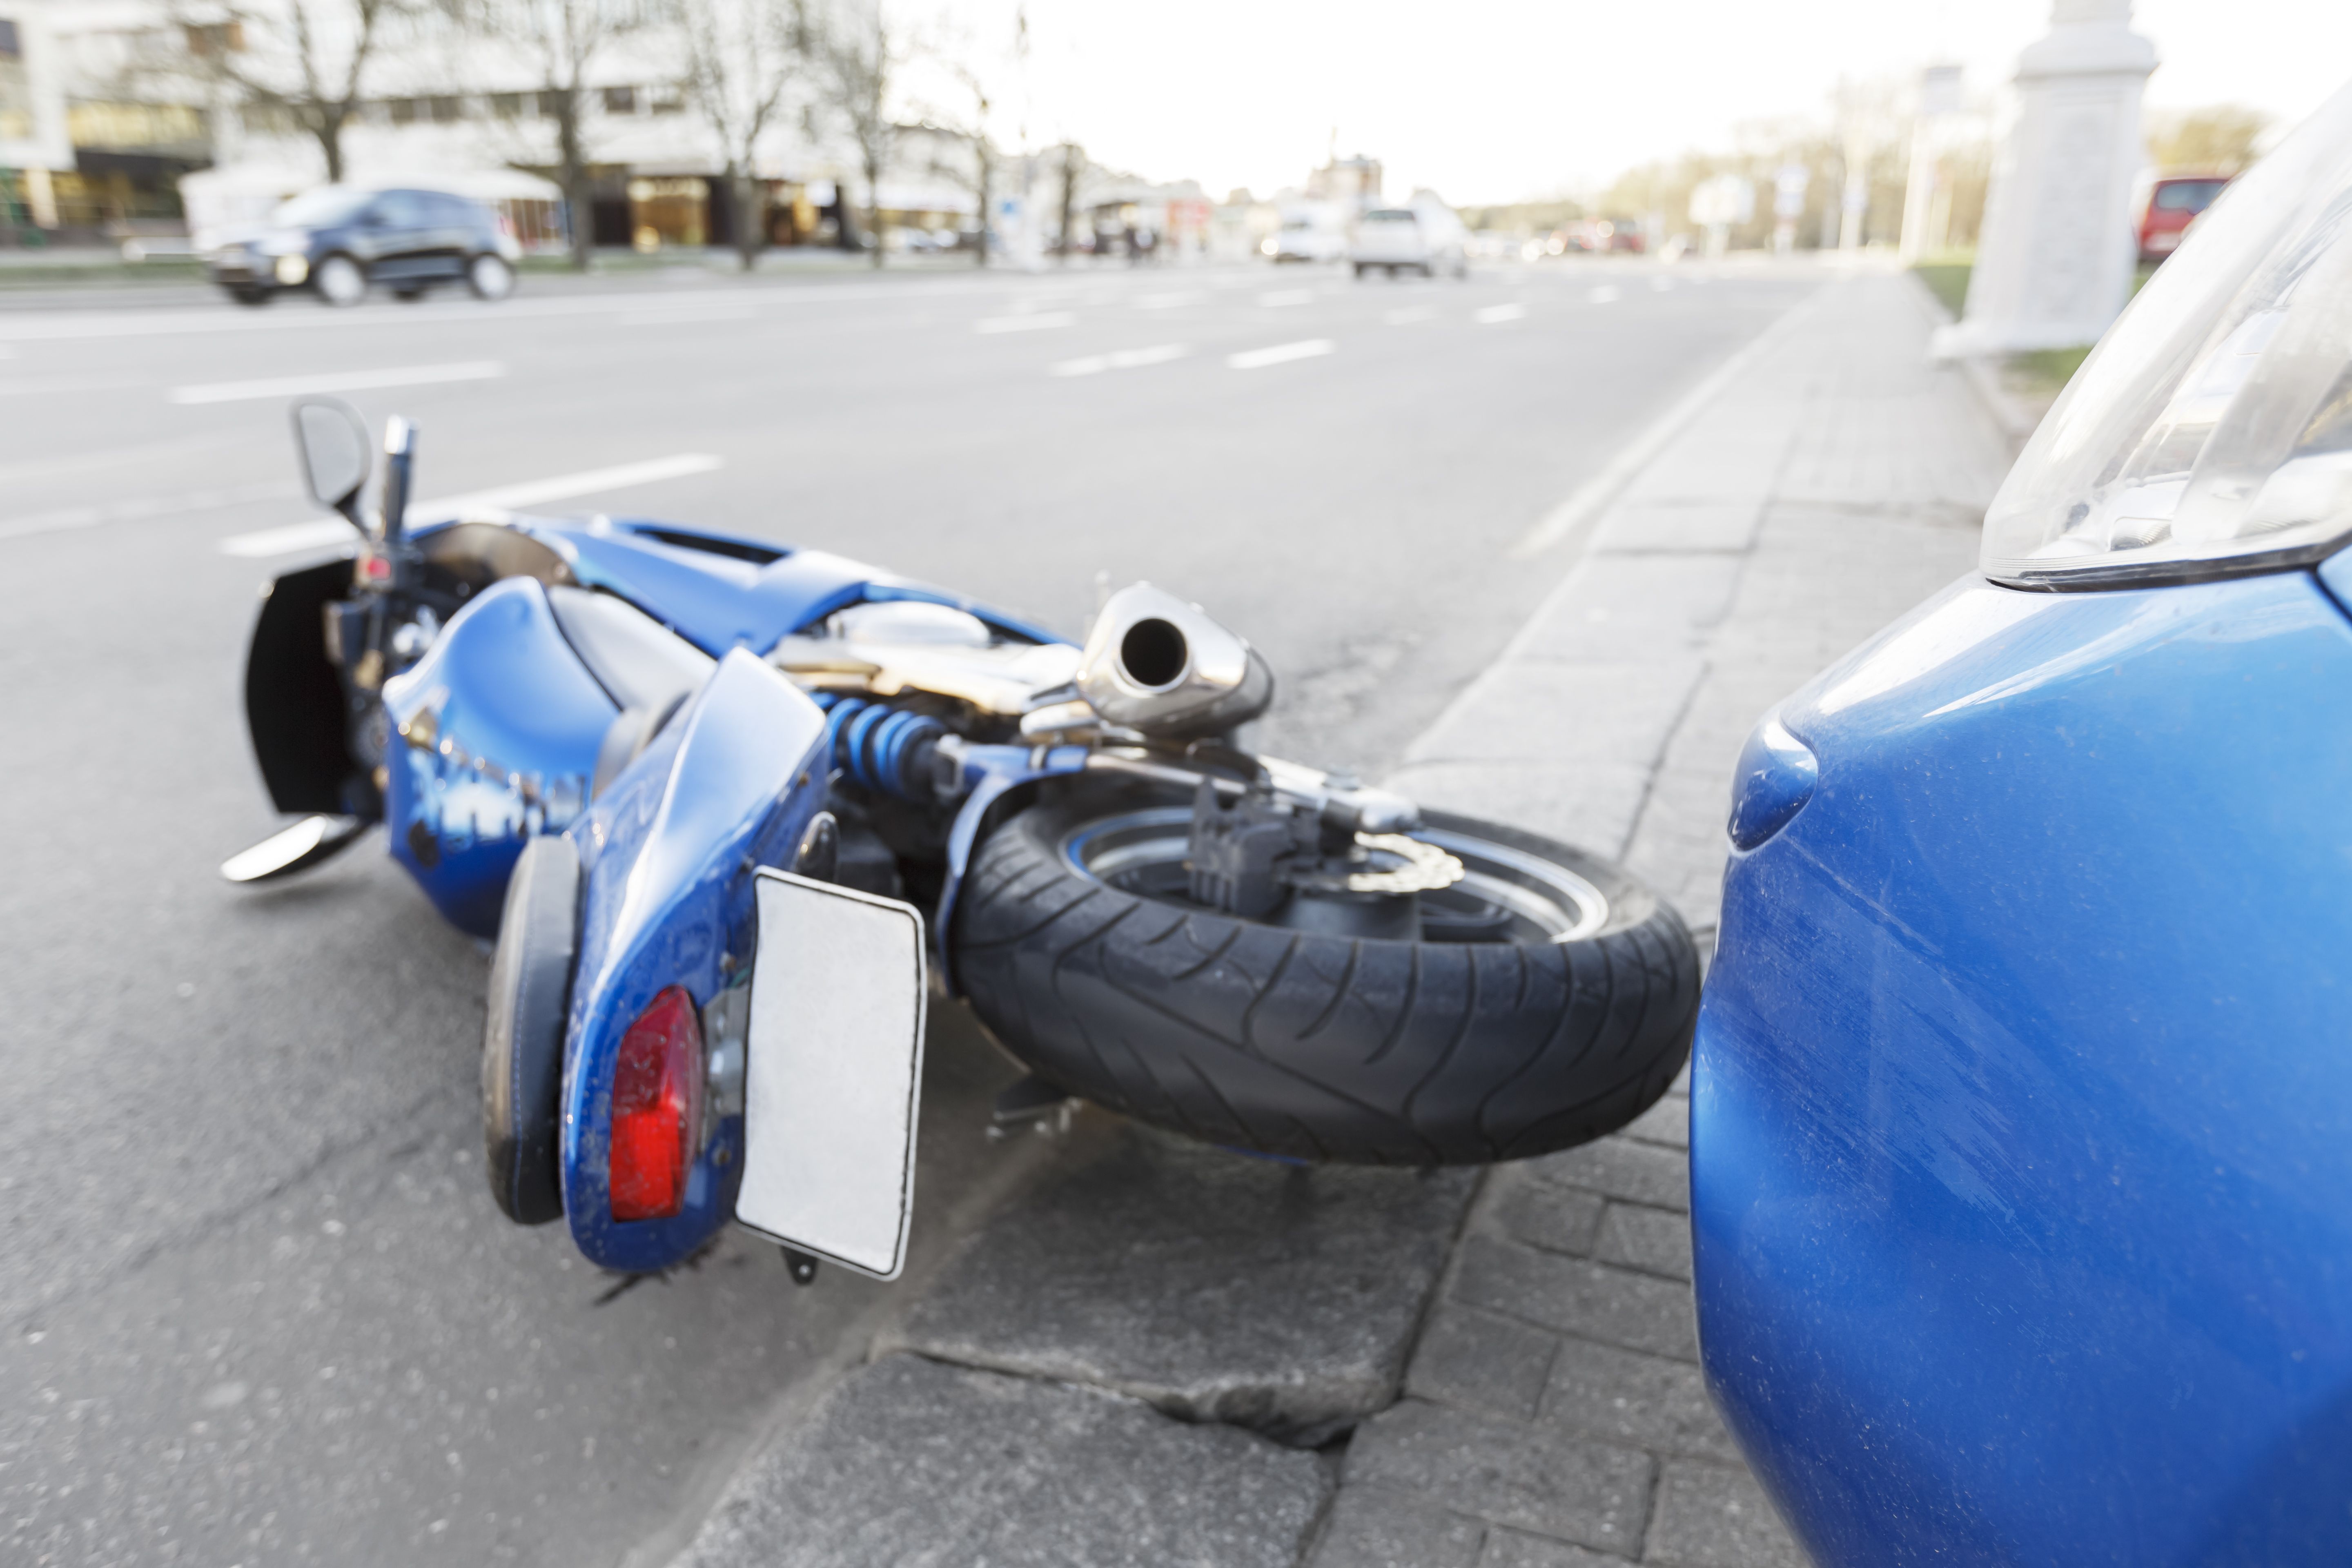 Motorcycle lying on the road after a motorcycle accident